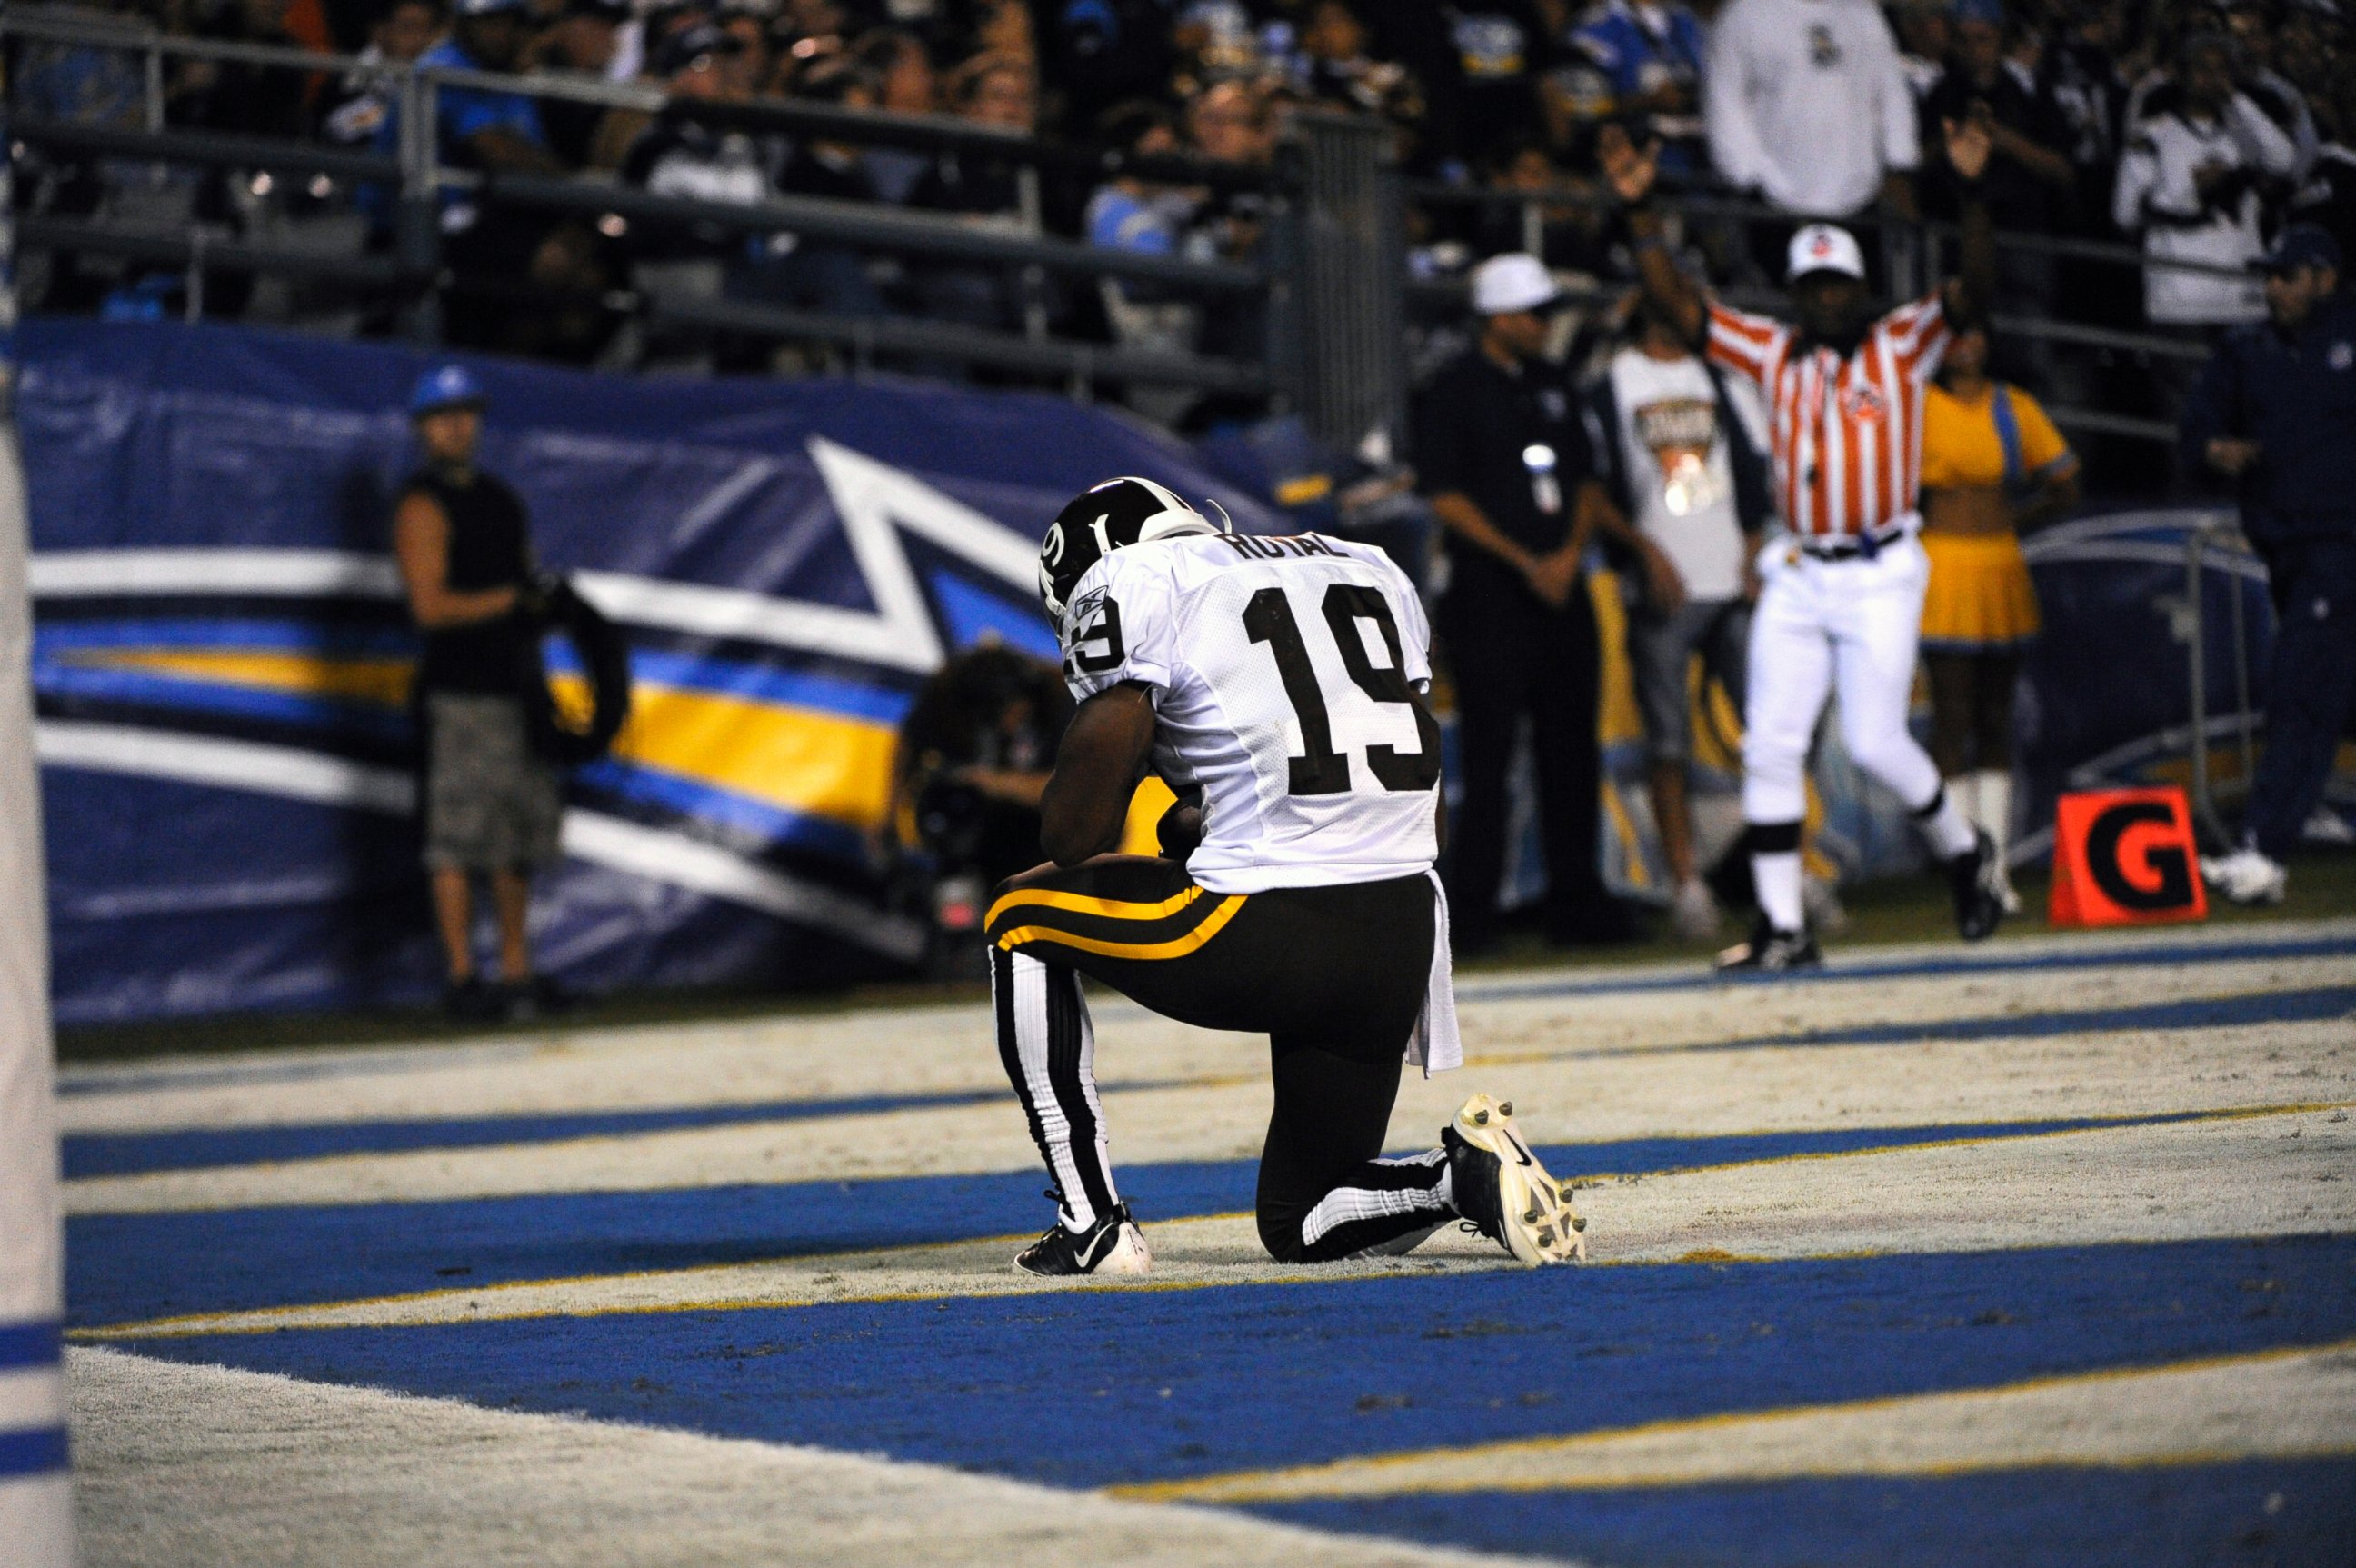 PHOTO: The Denver Broncos Eddie Royal kneels in the end zone after scoring his 2nd runback for a touchdown vs. the San Diego Chargers at Qualcomm Stadium in San Diego, Oct. 19, 2009.